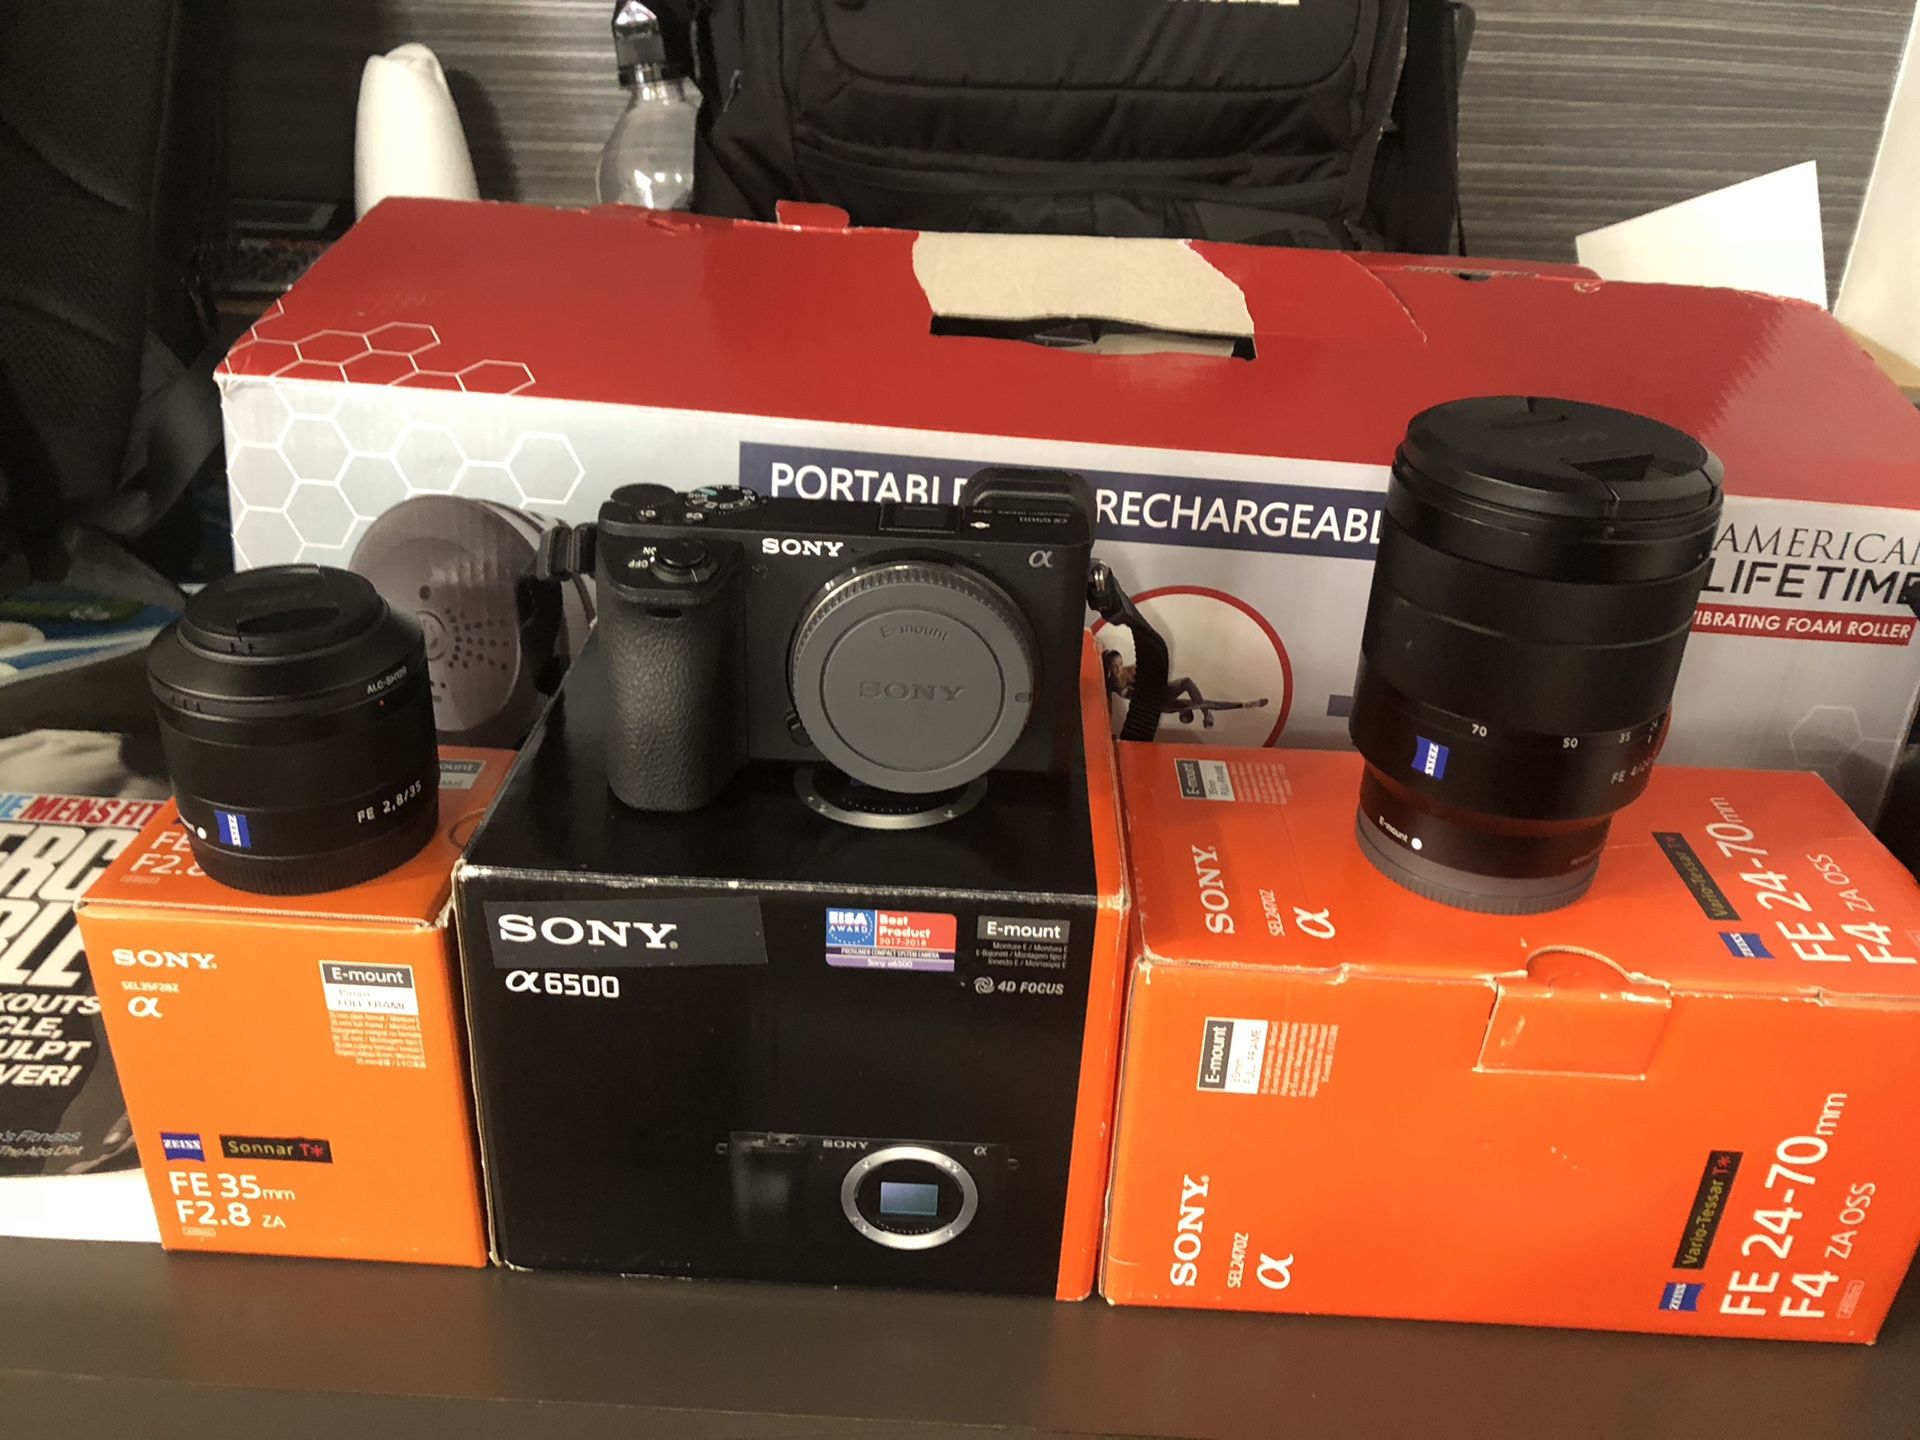 SONY A 6500 With LENSES ZEISS 24-70mm AND 35mm